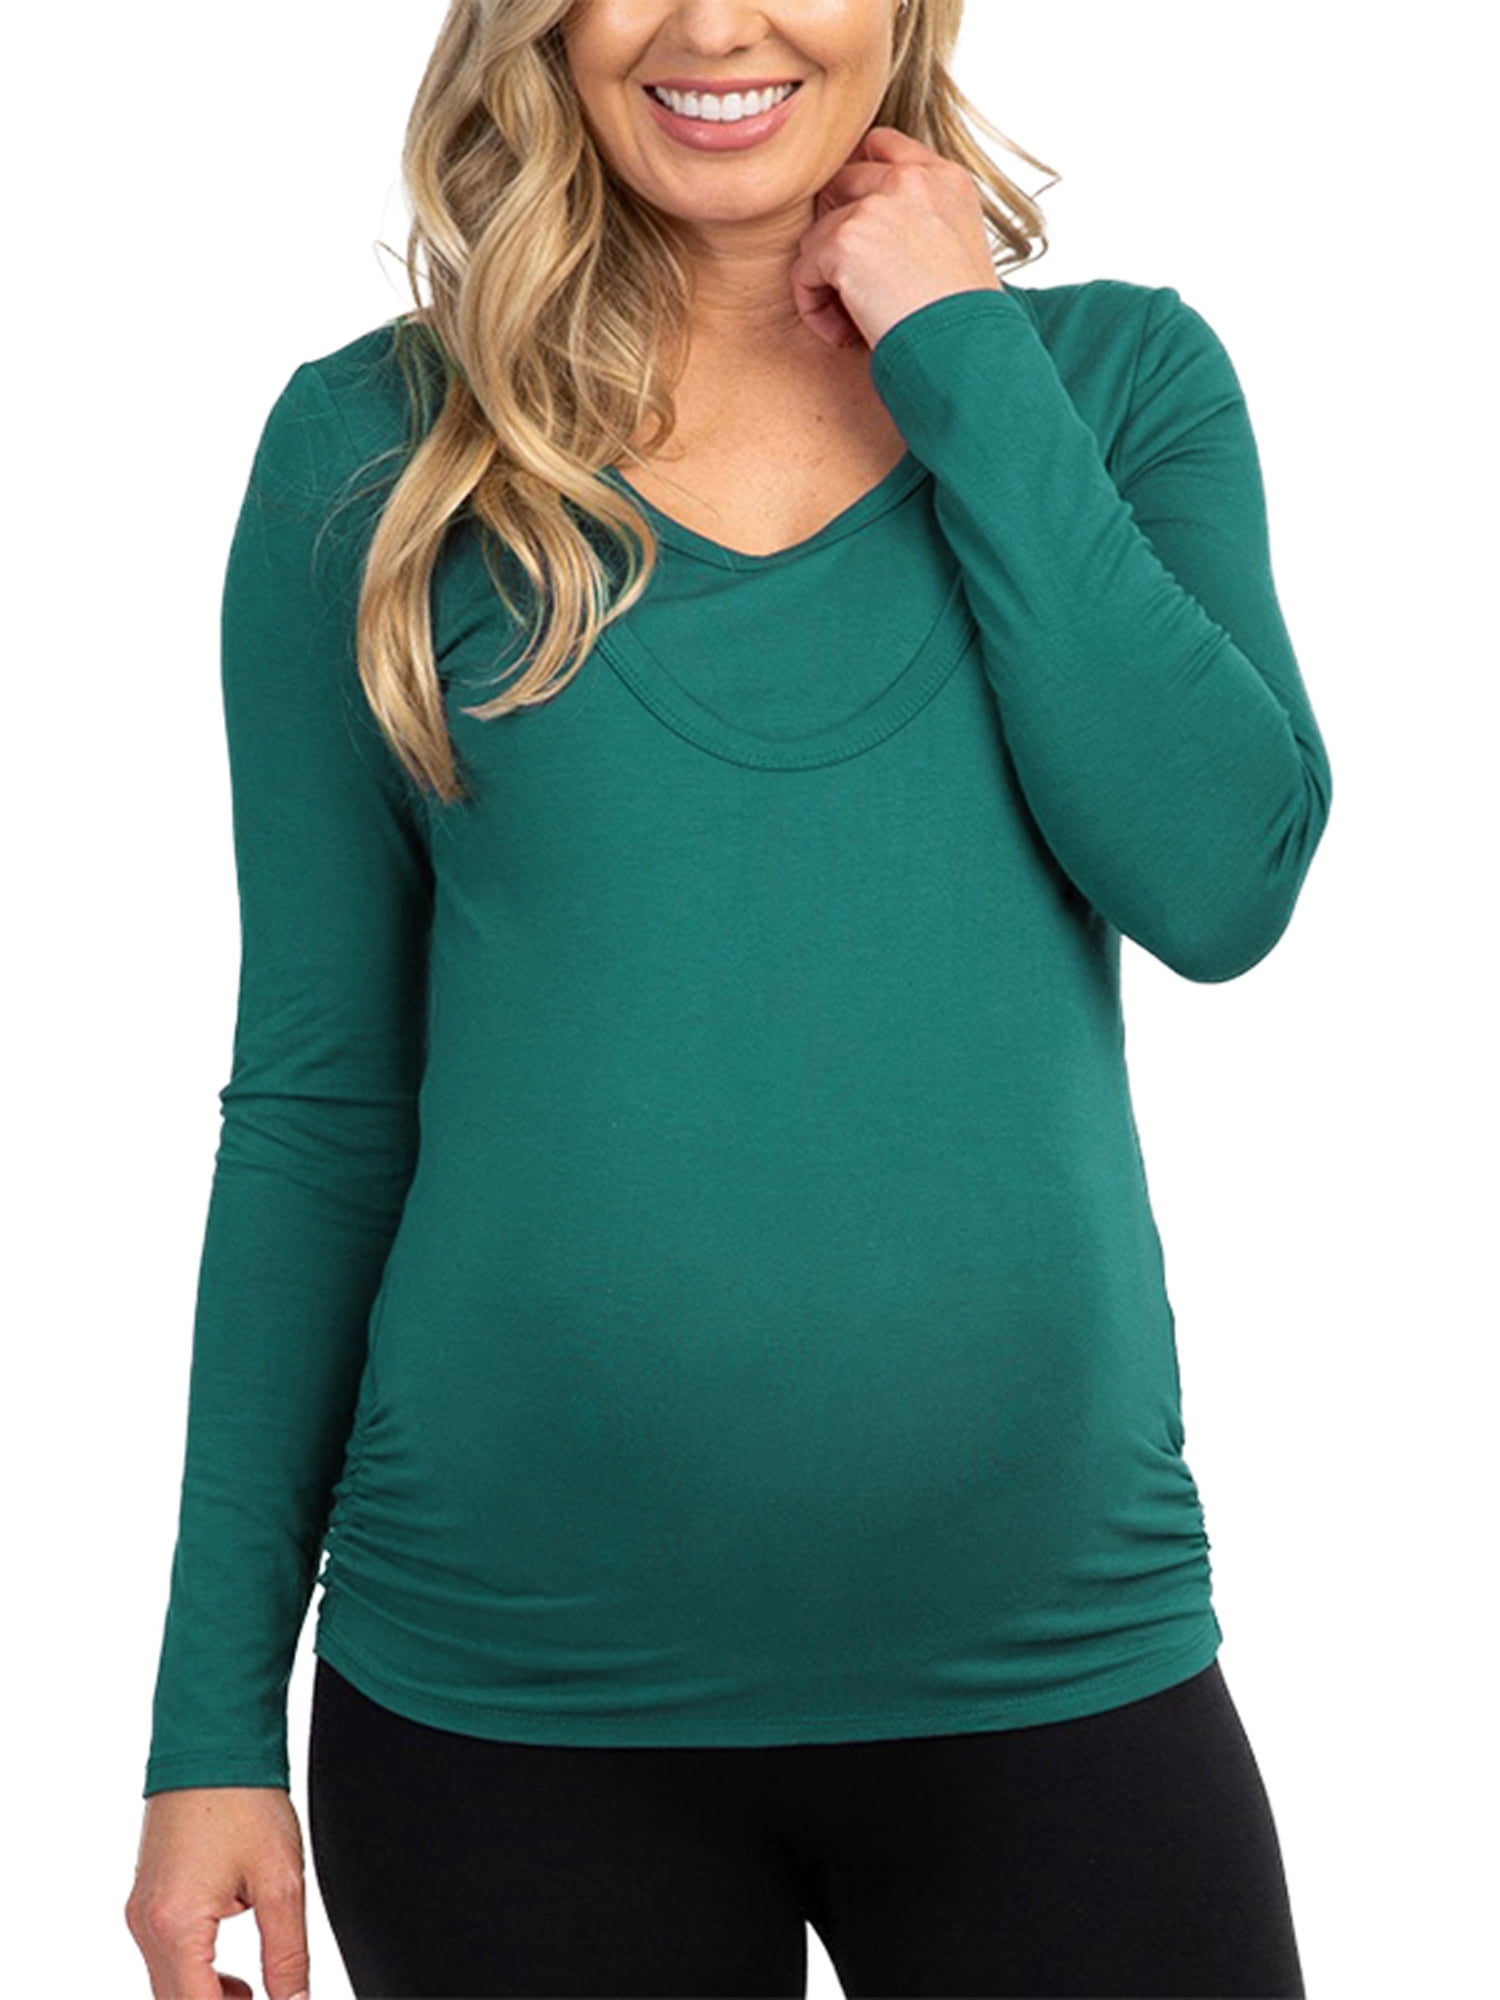 Women Pregnant Nusring Maternity Casual Gradient Long Sleeve Top Blouse Pullover 